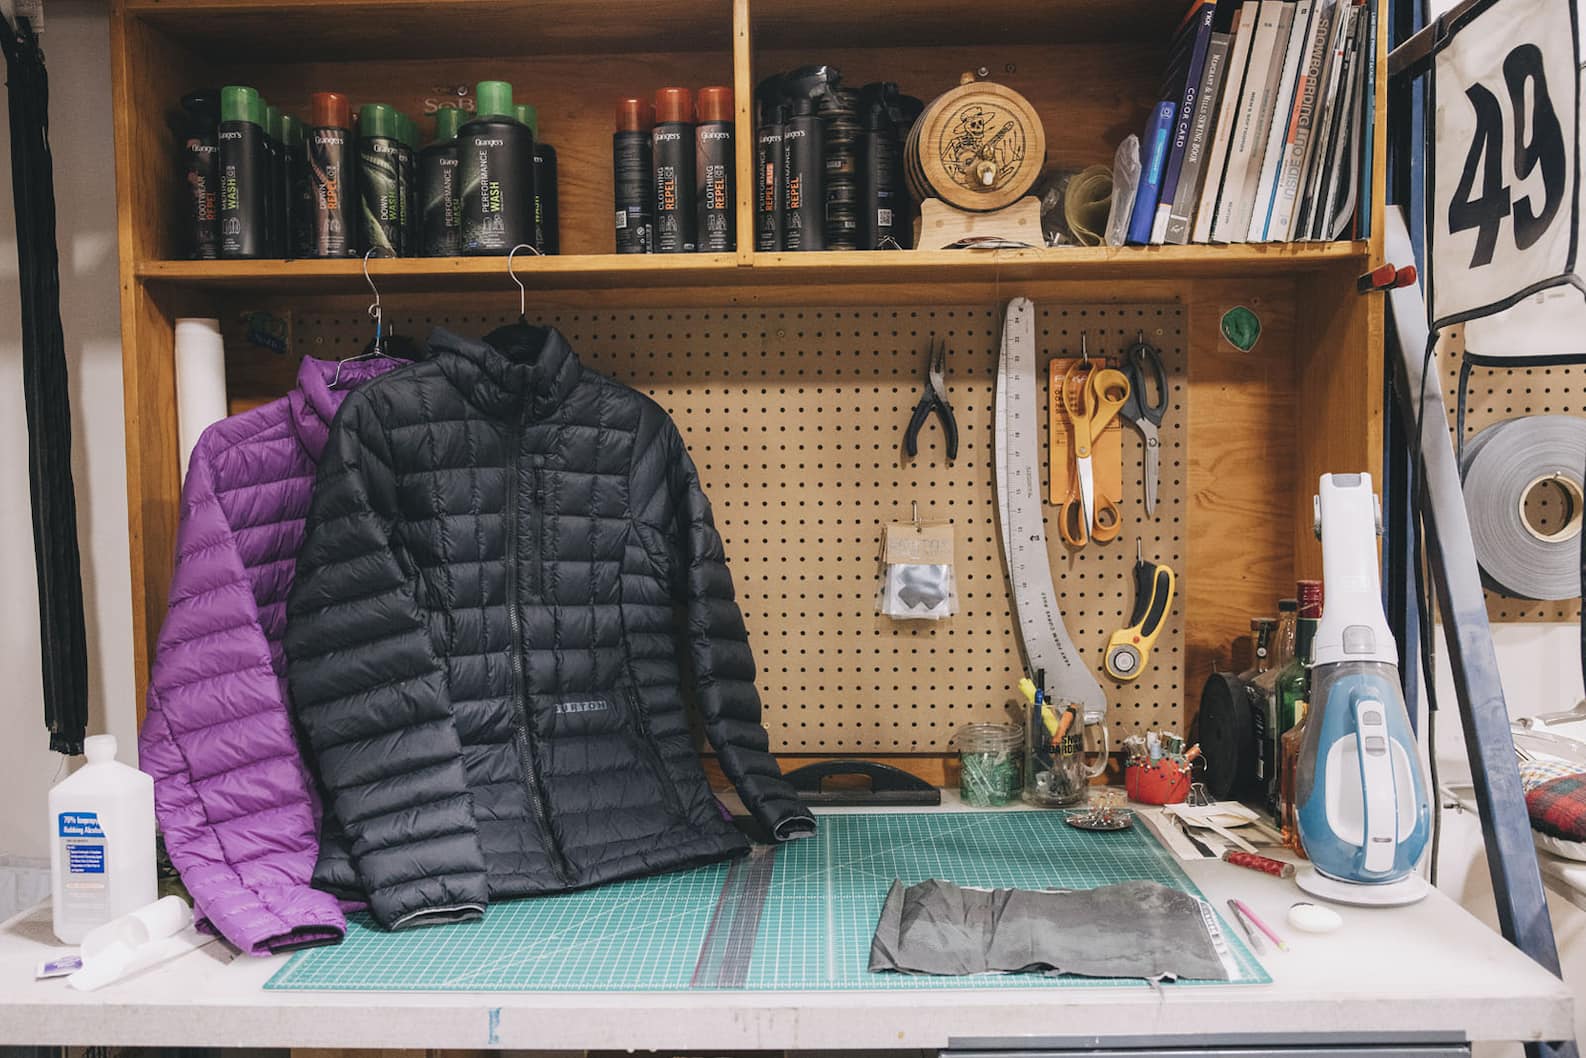 NoSo: the DIY, fabric patch to repair your down jacket, tent